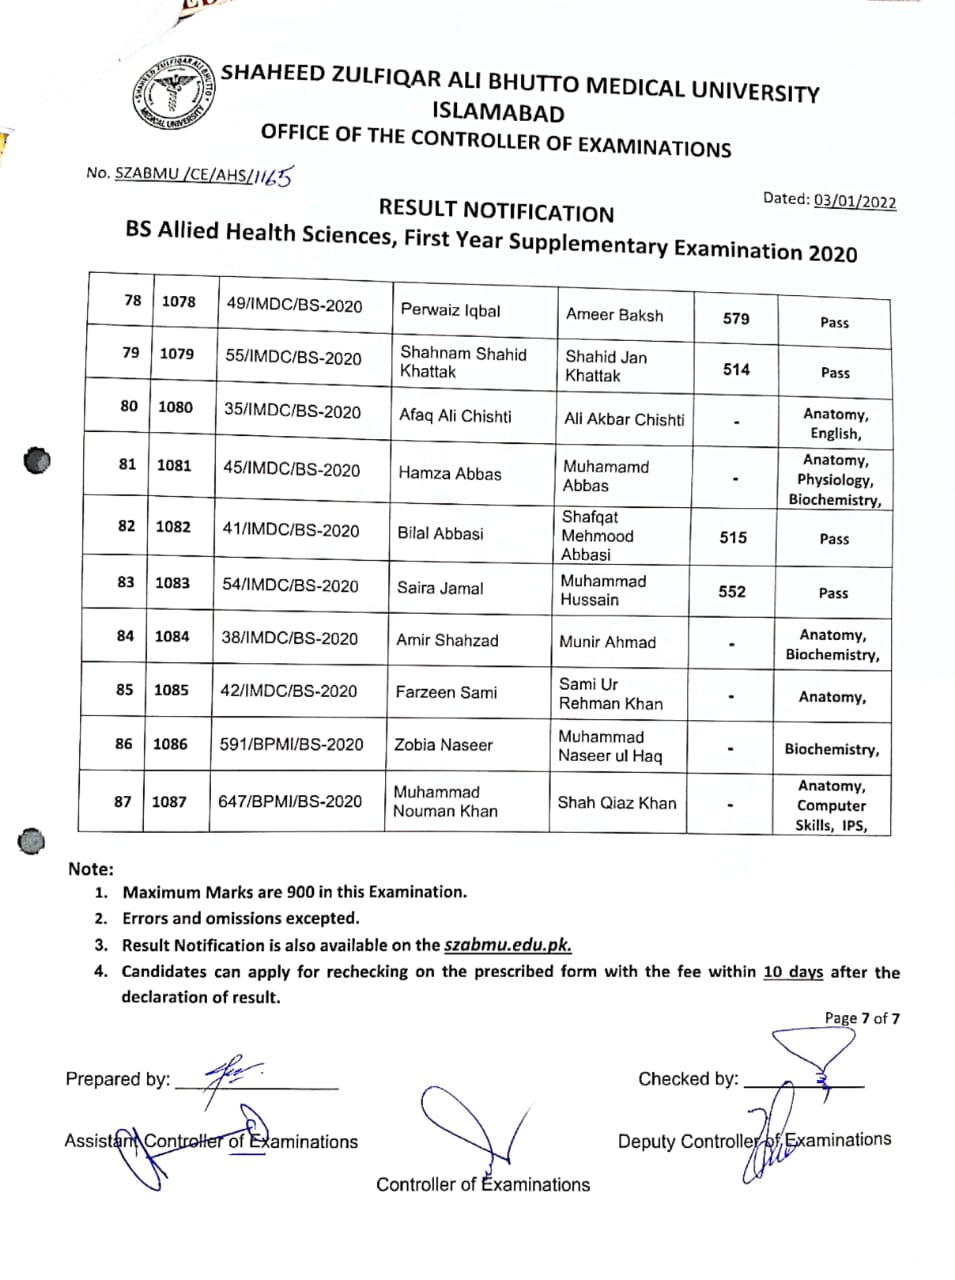 Result Notification - AHS First Year Supplementary Result 2020